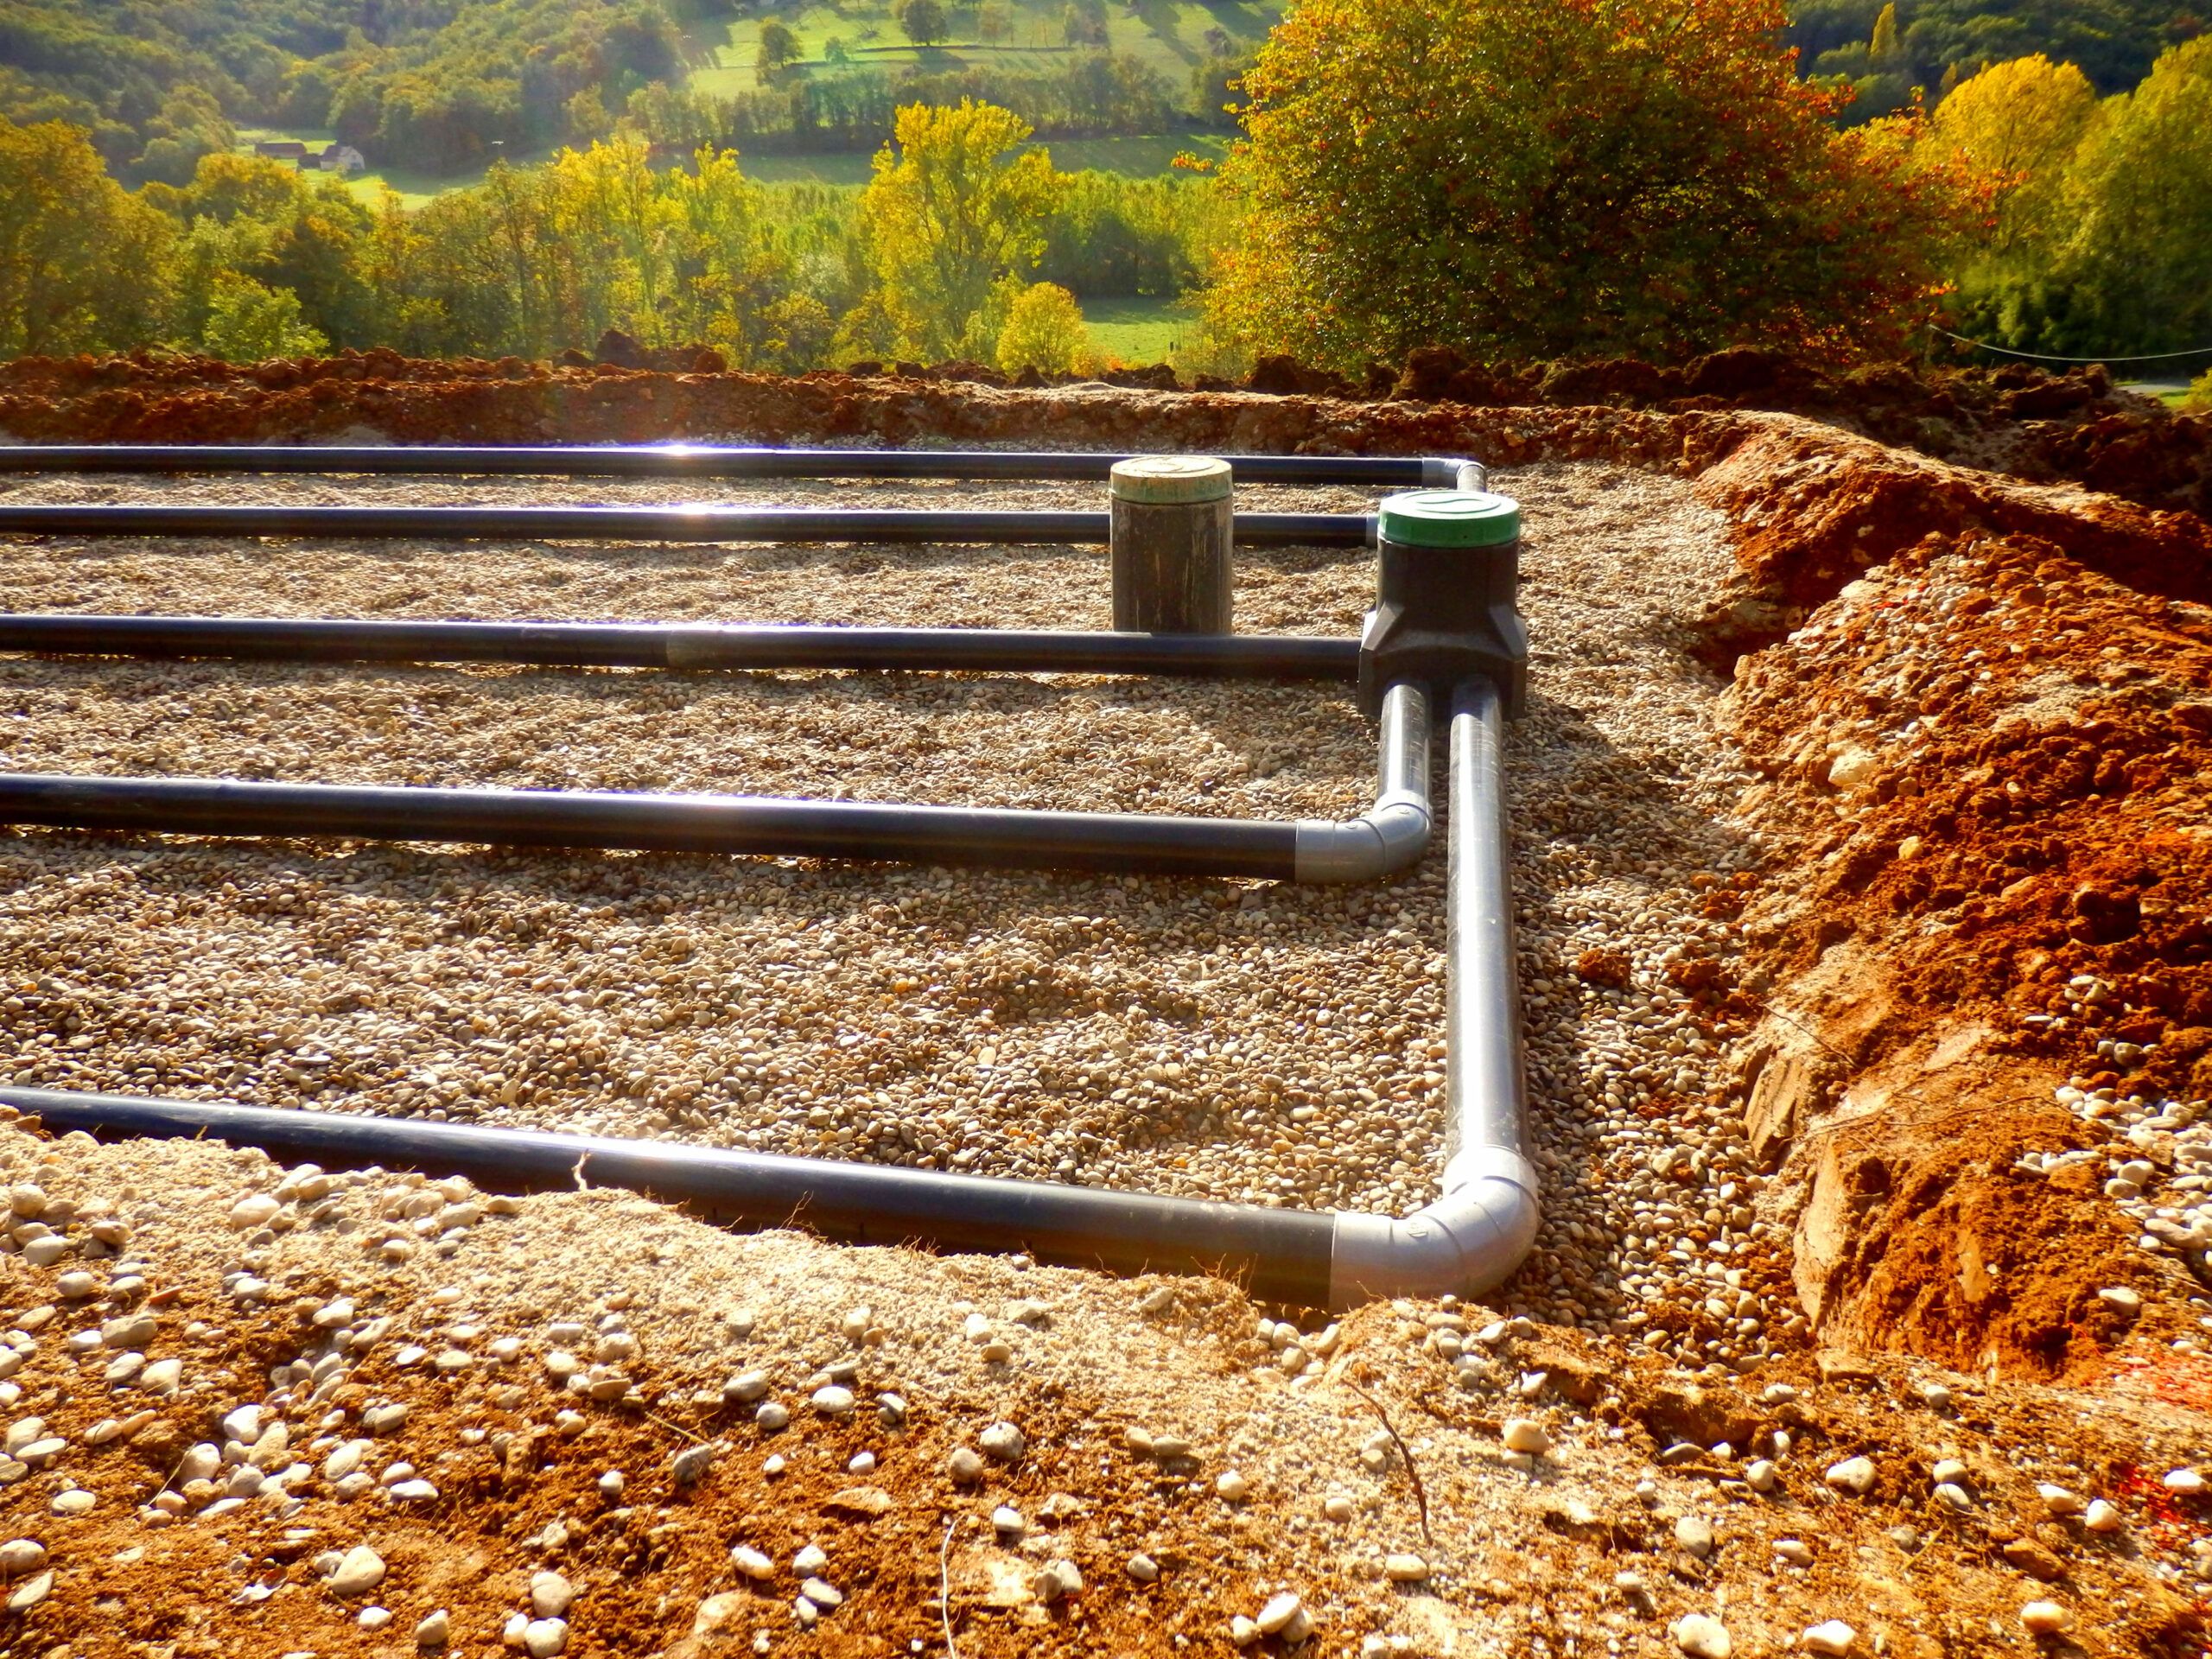 Sand_and_Gravel_Filter_Bed_Septic_System_iStock_498498376